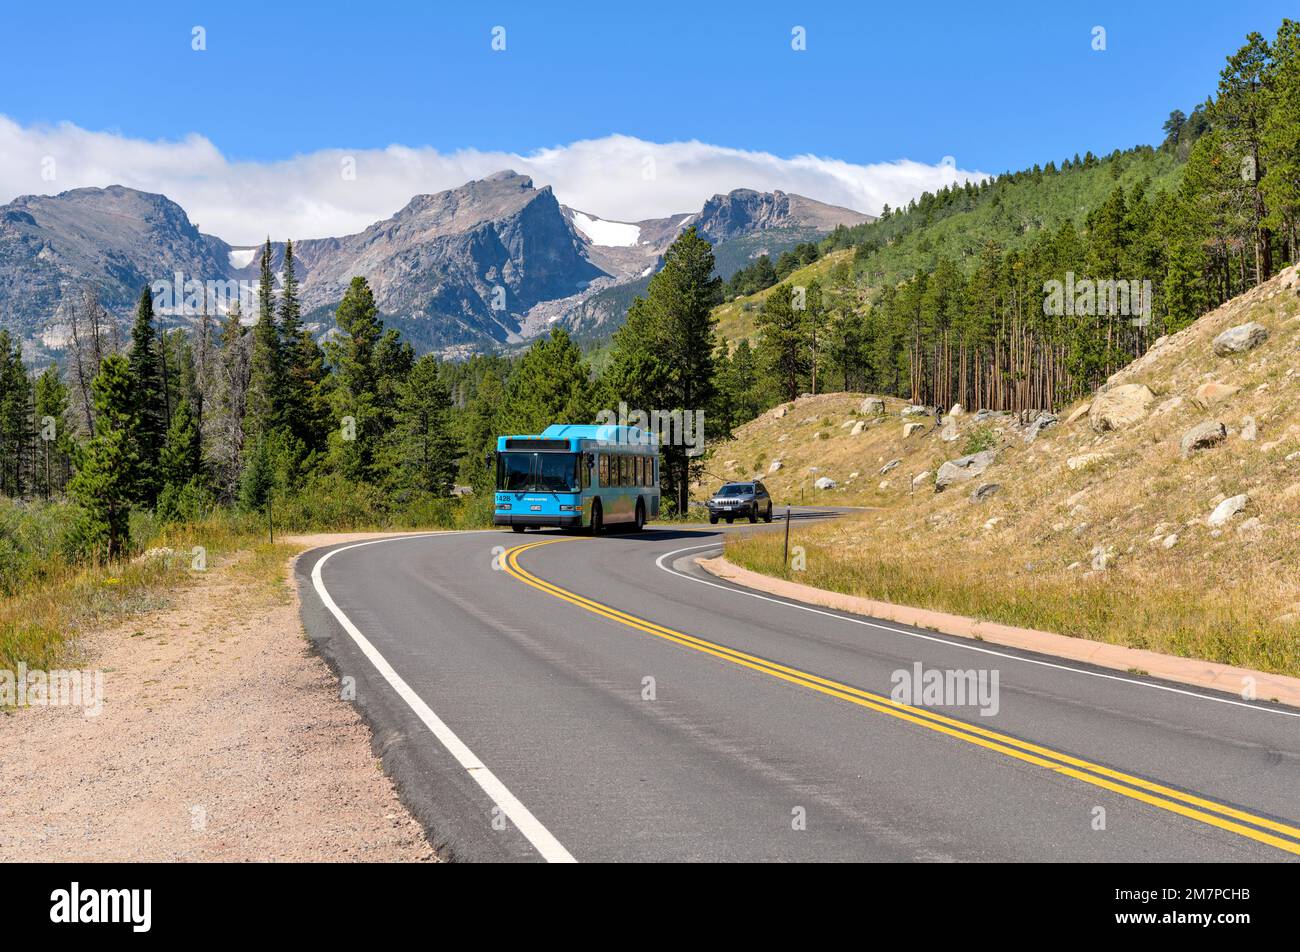 Shuttle on Bear Lake Road - During Summer and Autumn months, Shuttle buses help to reduce heavy traffic on scenic and popular Bear Lake Road, RMNP, CO. Stock Photo